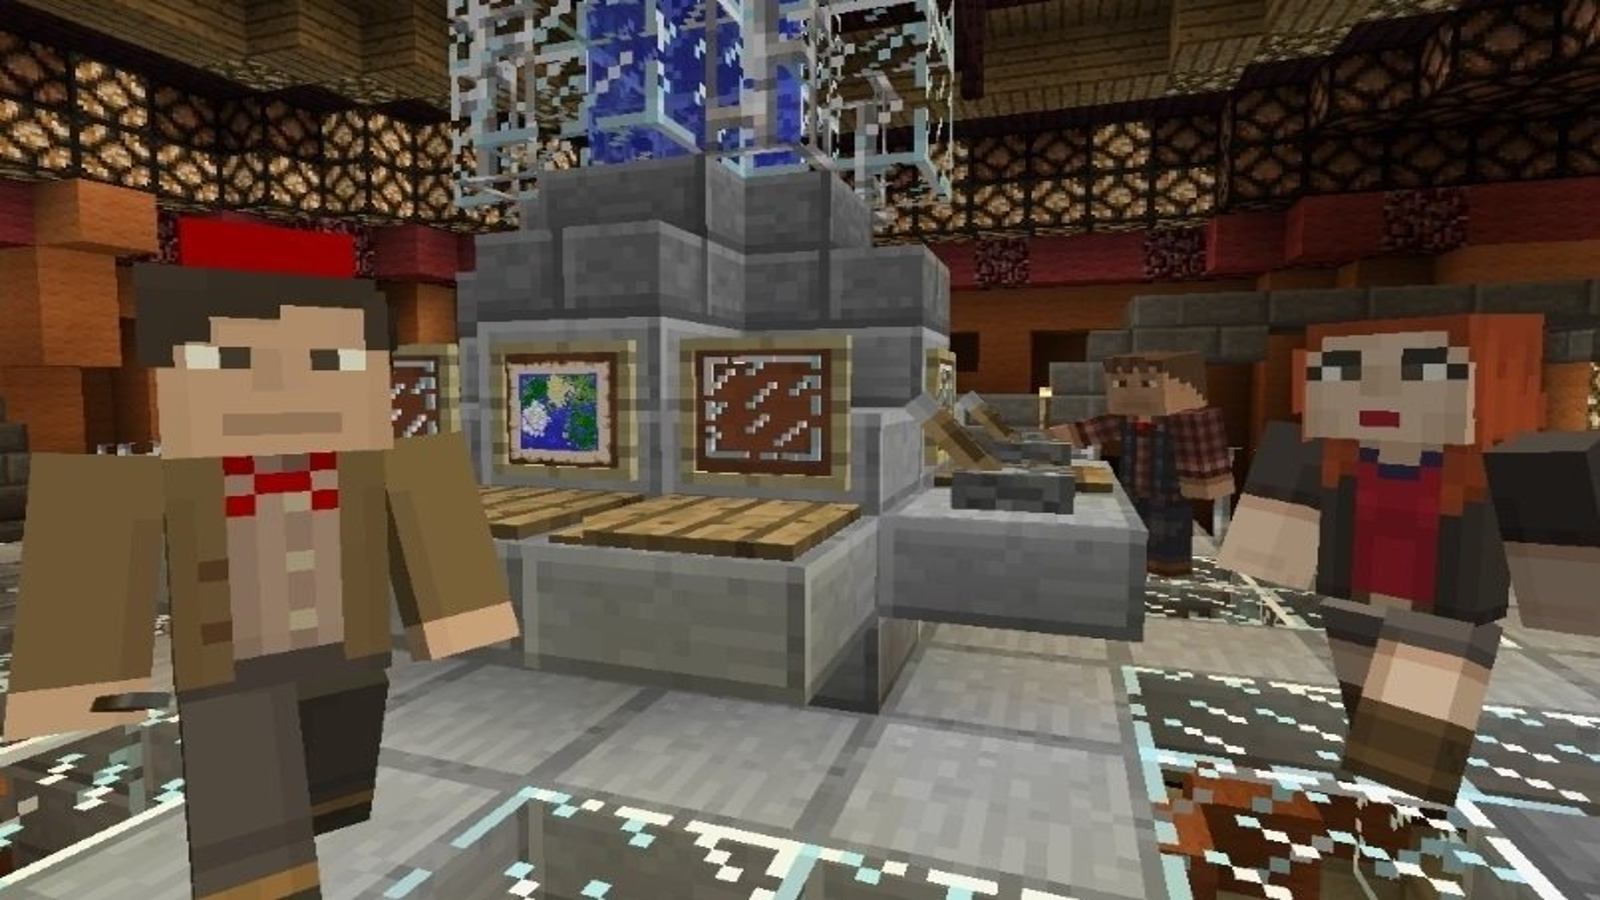 Minecraft: Xbox 360 Edition Skin Pack 2 is Available. Complete